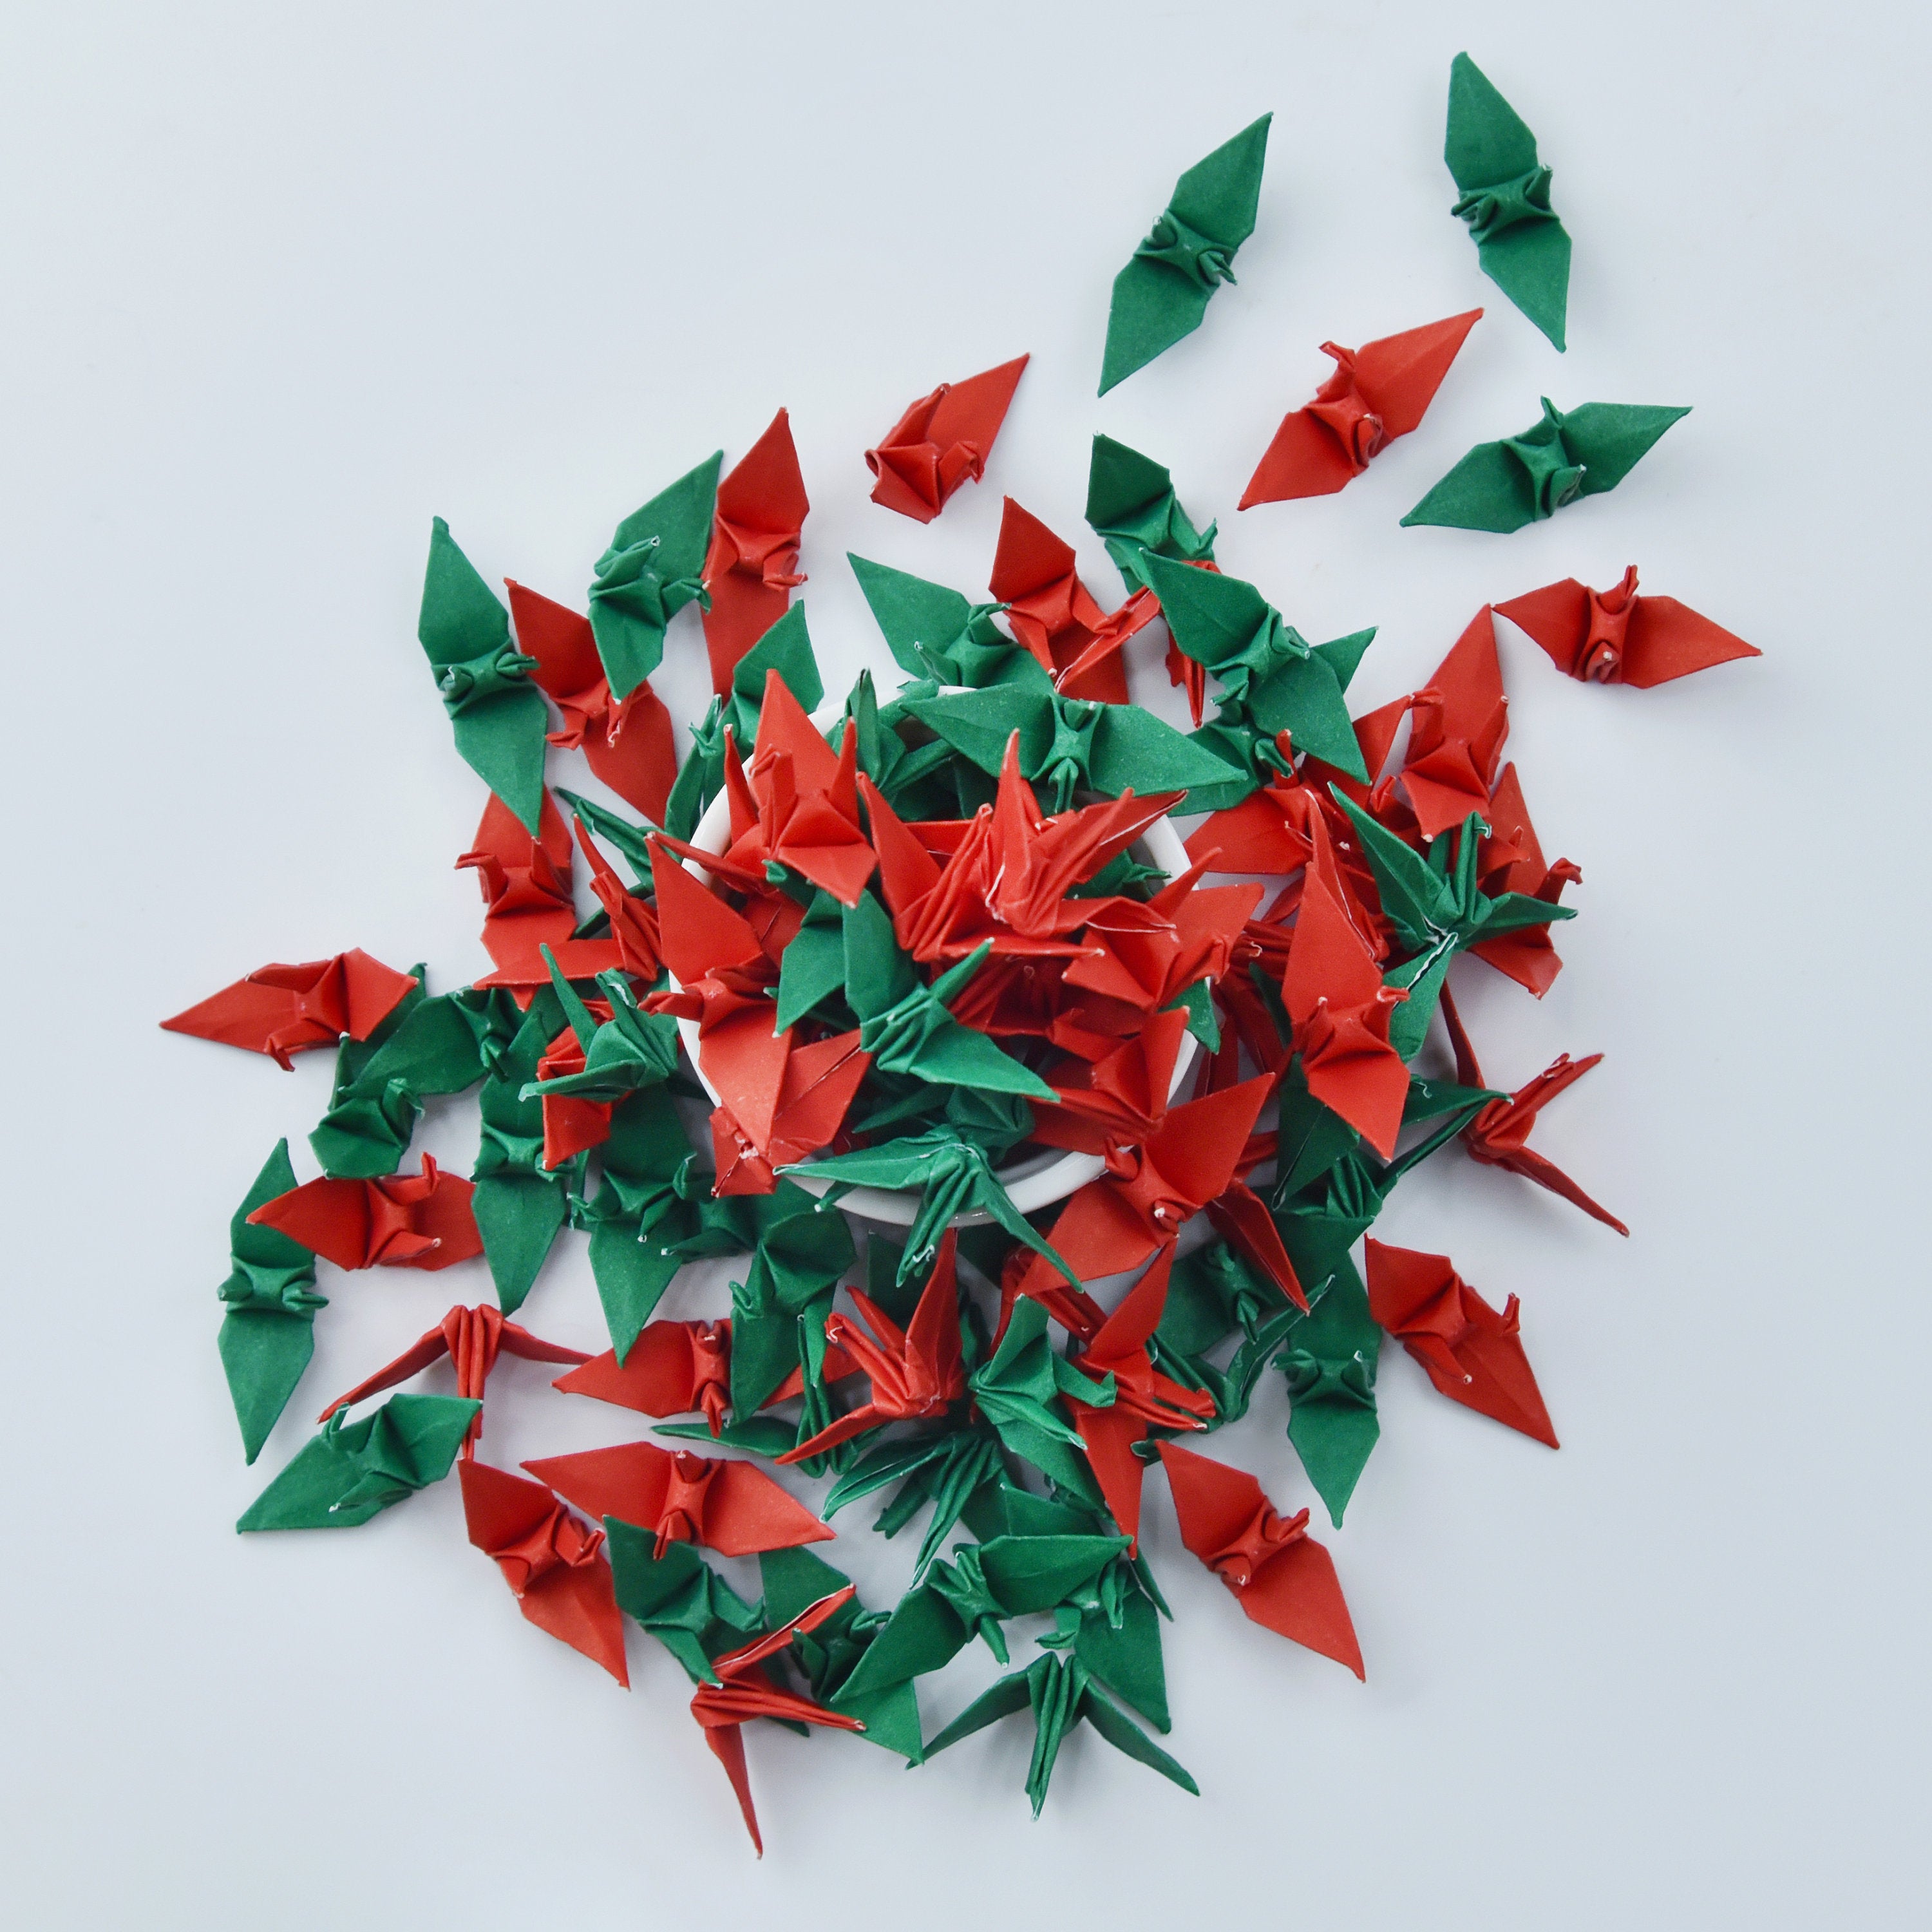 100 Christmas Origami Paper Cranes 3.81cm (1.5 inches)